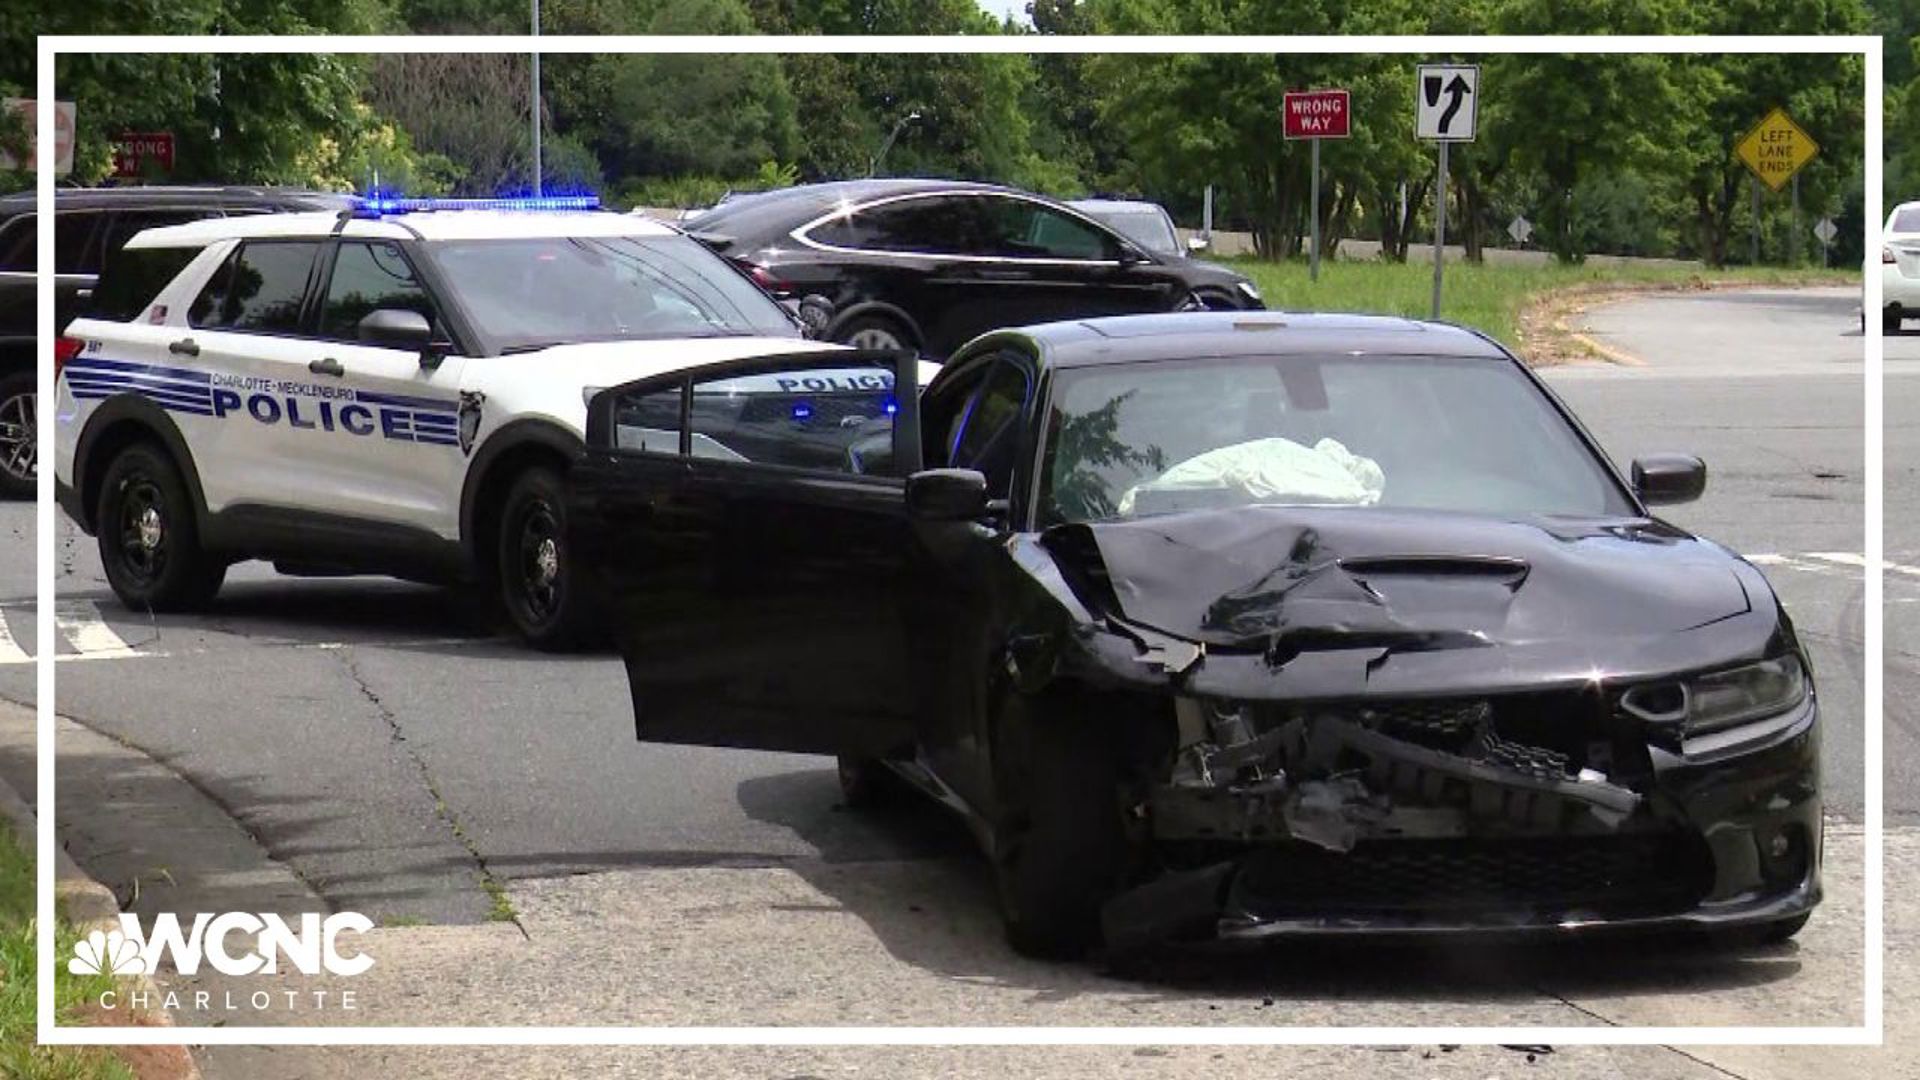 The suspect crashed into another vehicle at the intersection Charlottetowne Avenue and East Seventh Street, police said.